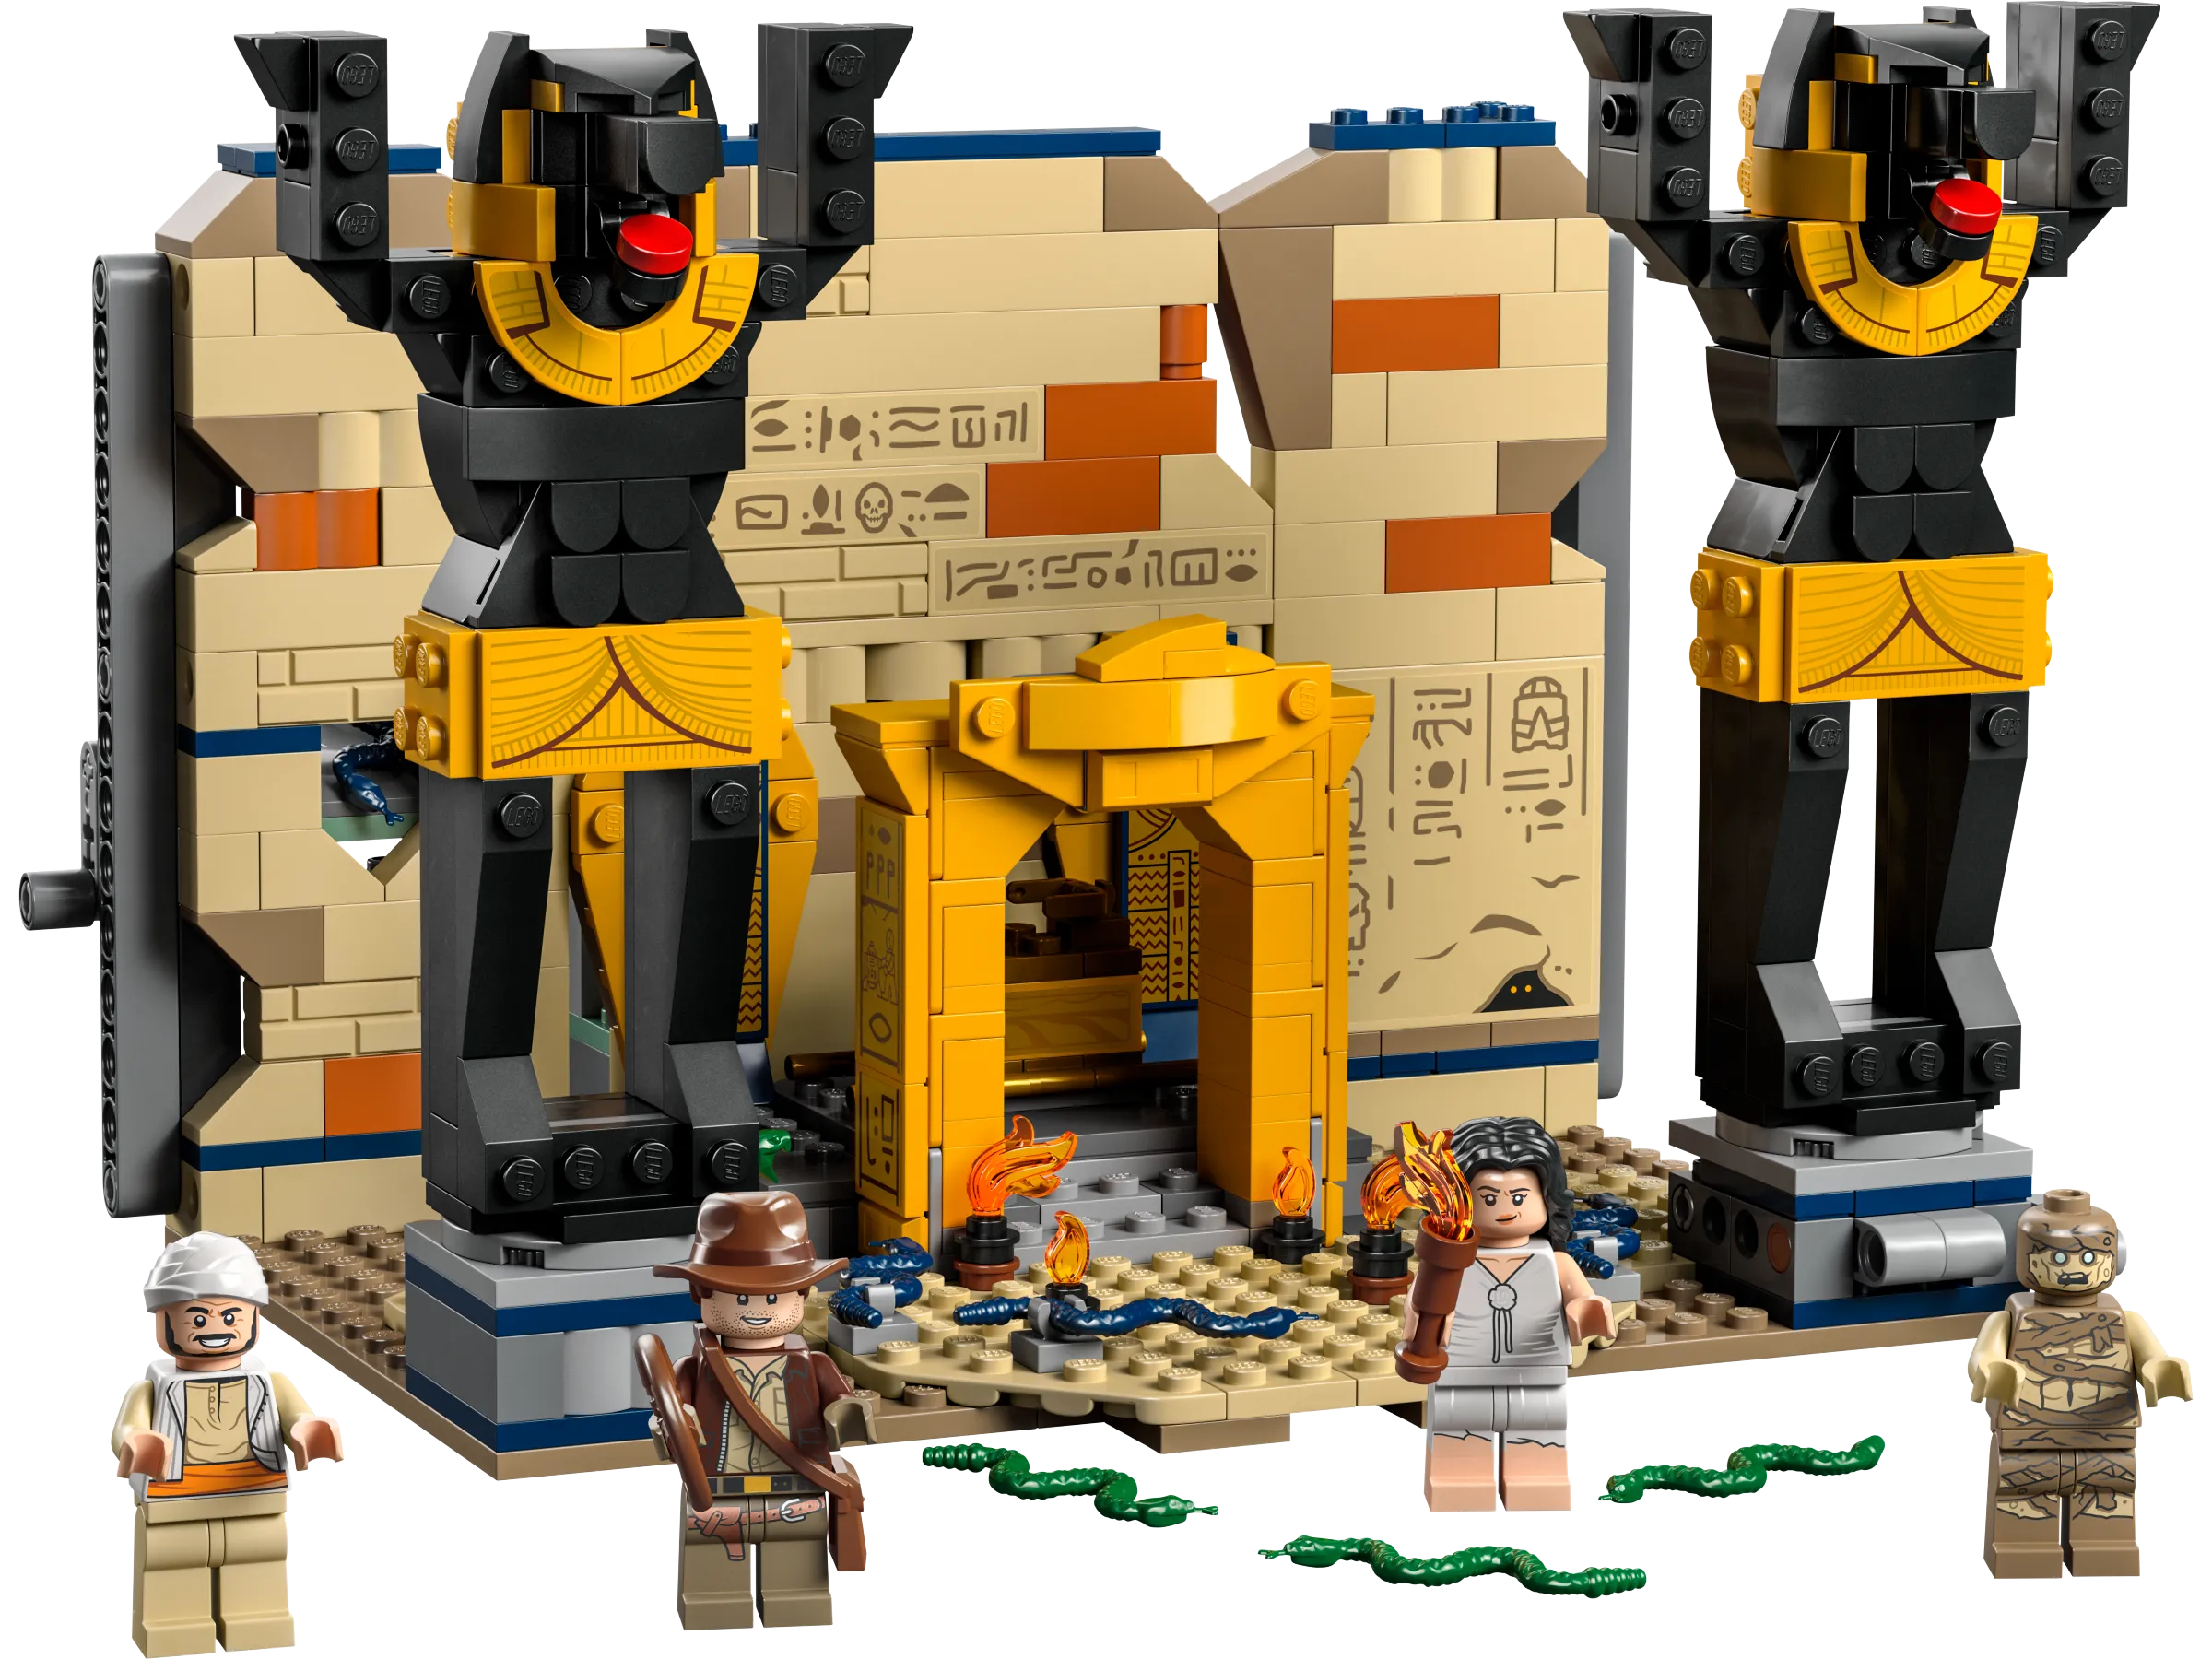 LEGO - Indiana Jones™ Escape from the Lost Tomb | Set 77013